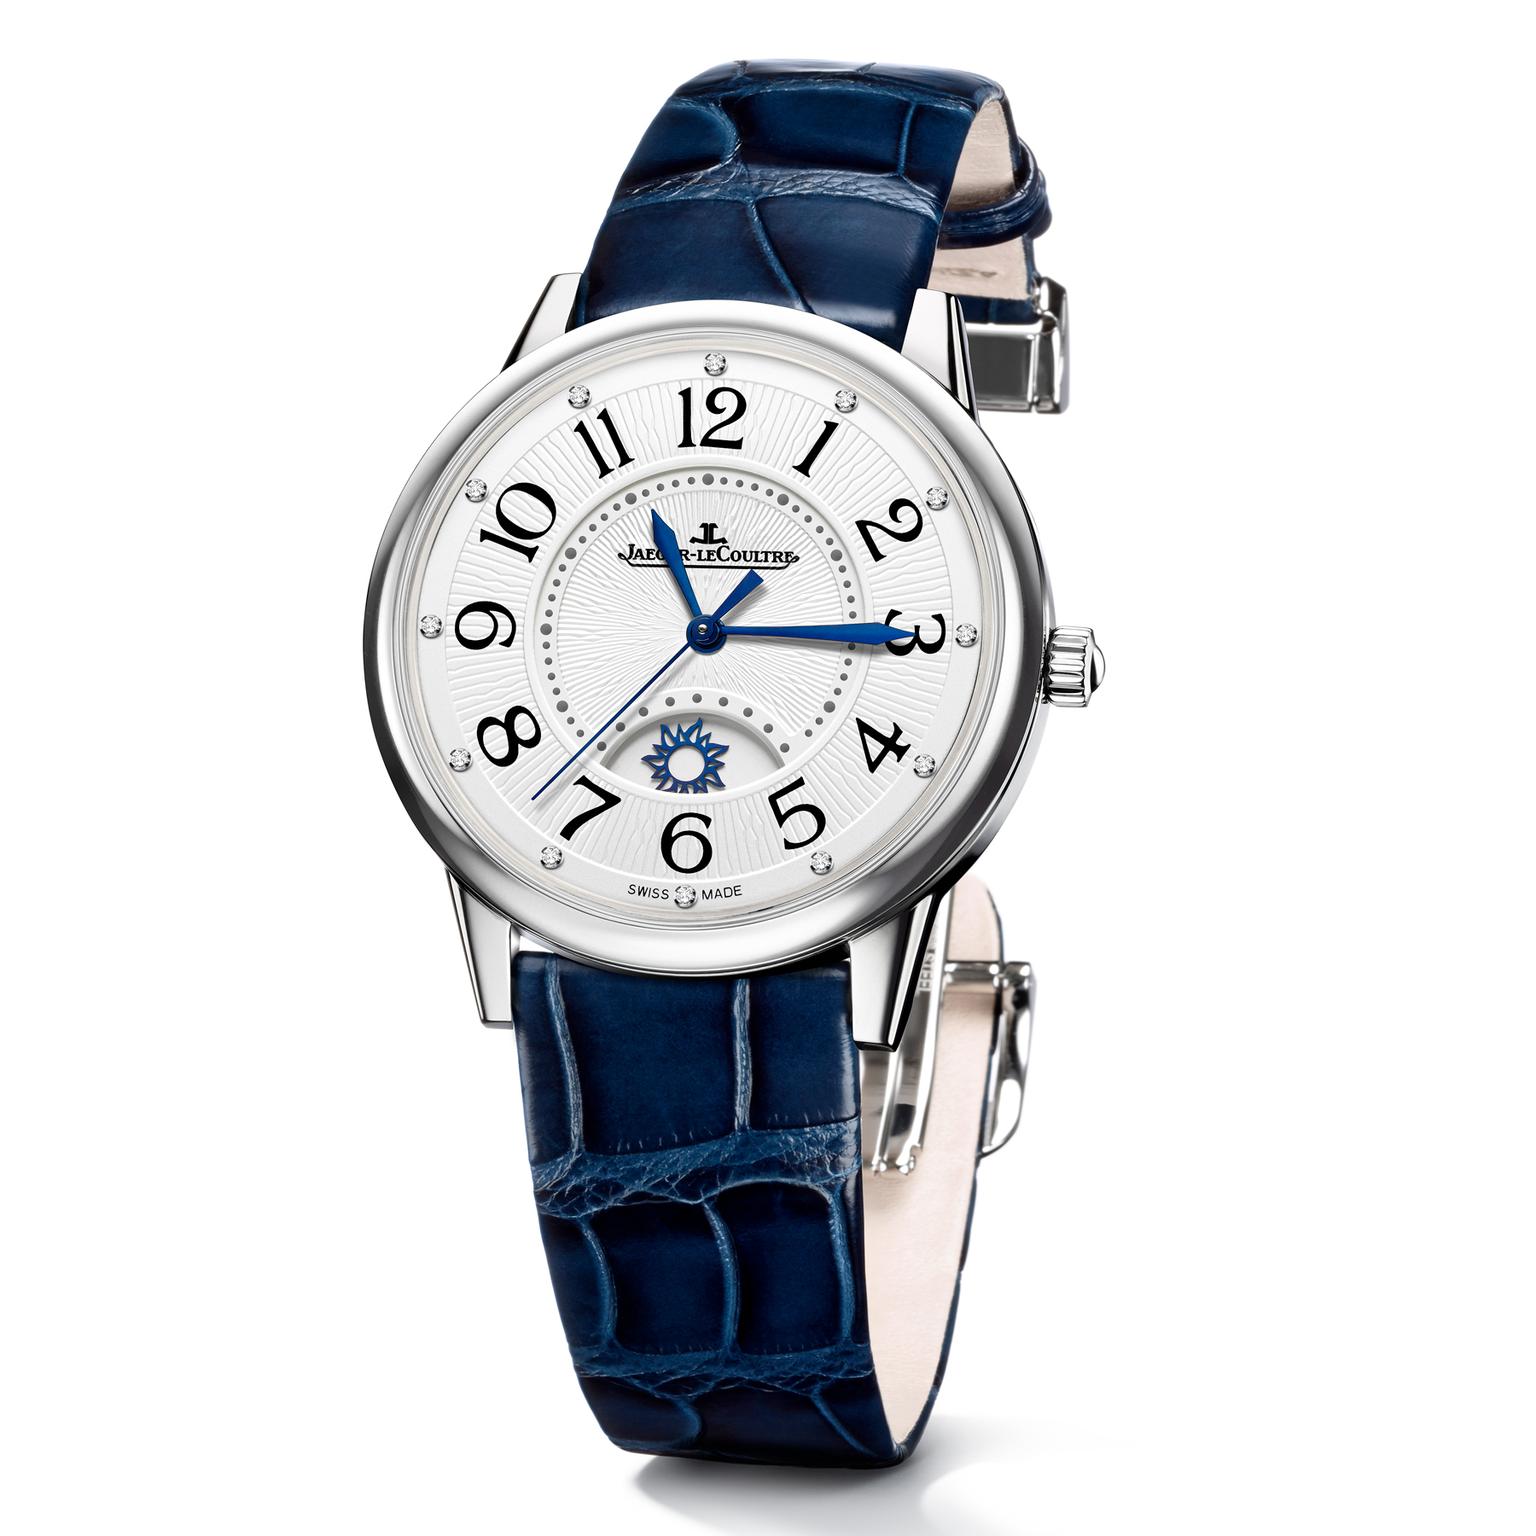 Jaeger-LeCoultre Rendez-Vous Night & Day large steel